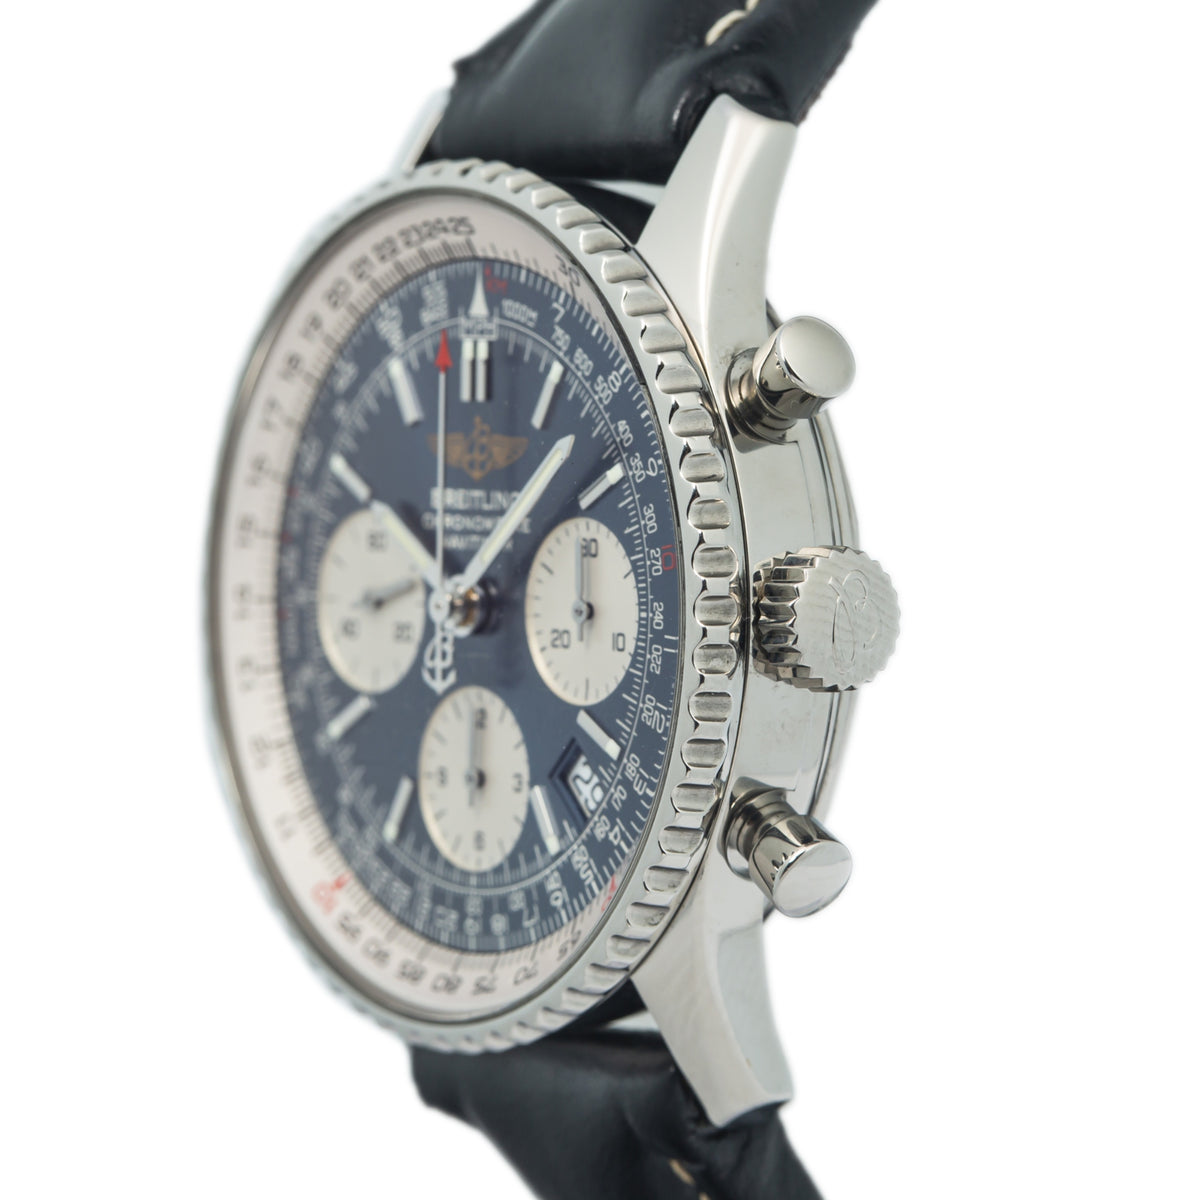 Breitling Navitimer A23322 Papers Chronograph Blue Dial Automatic Watch 42mm